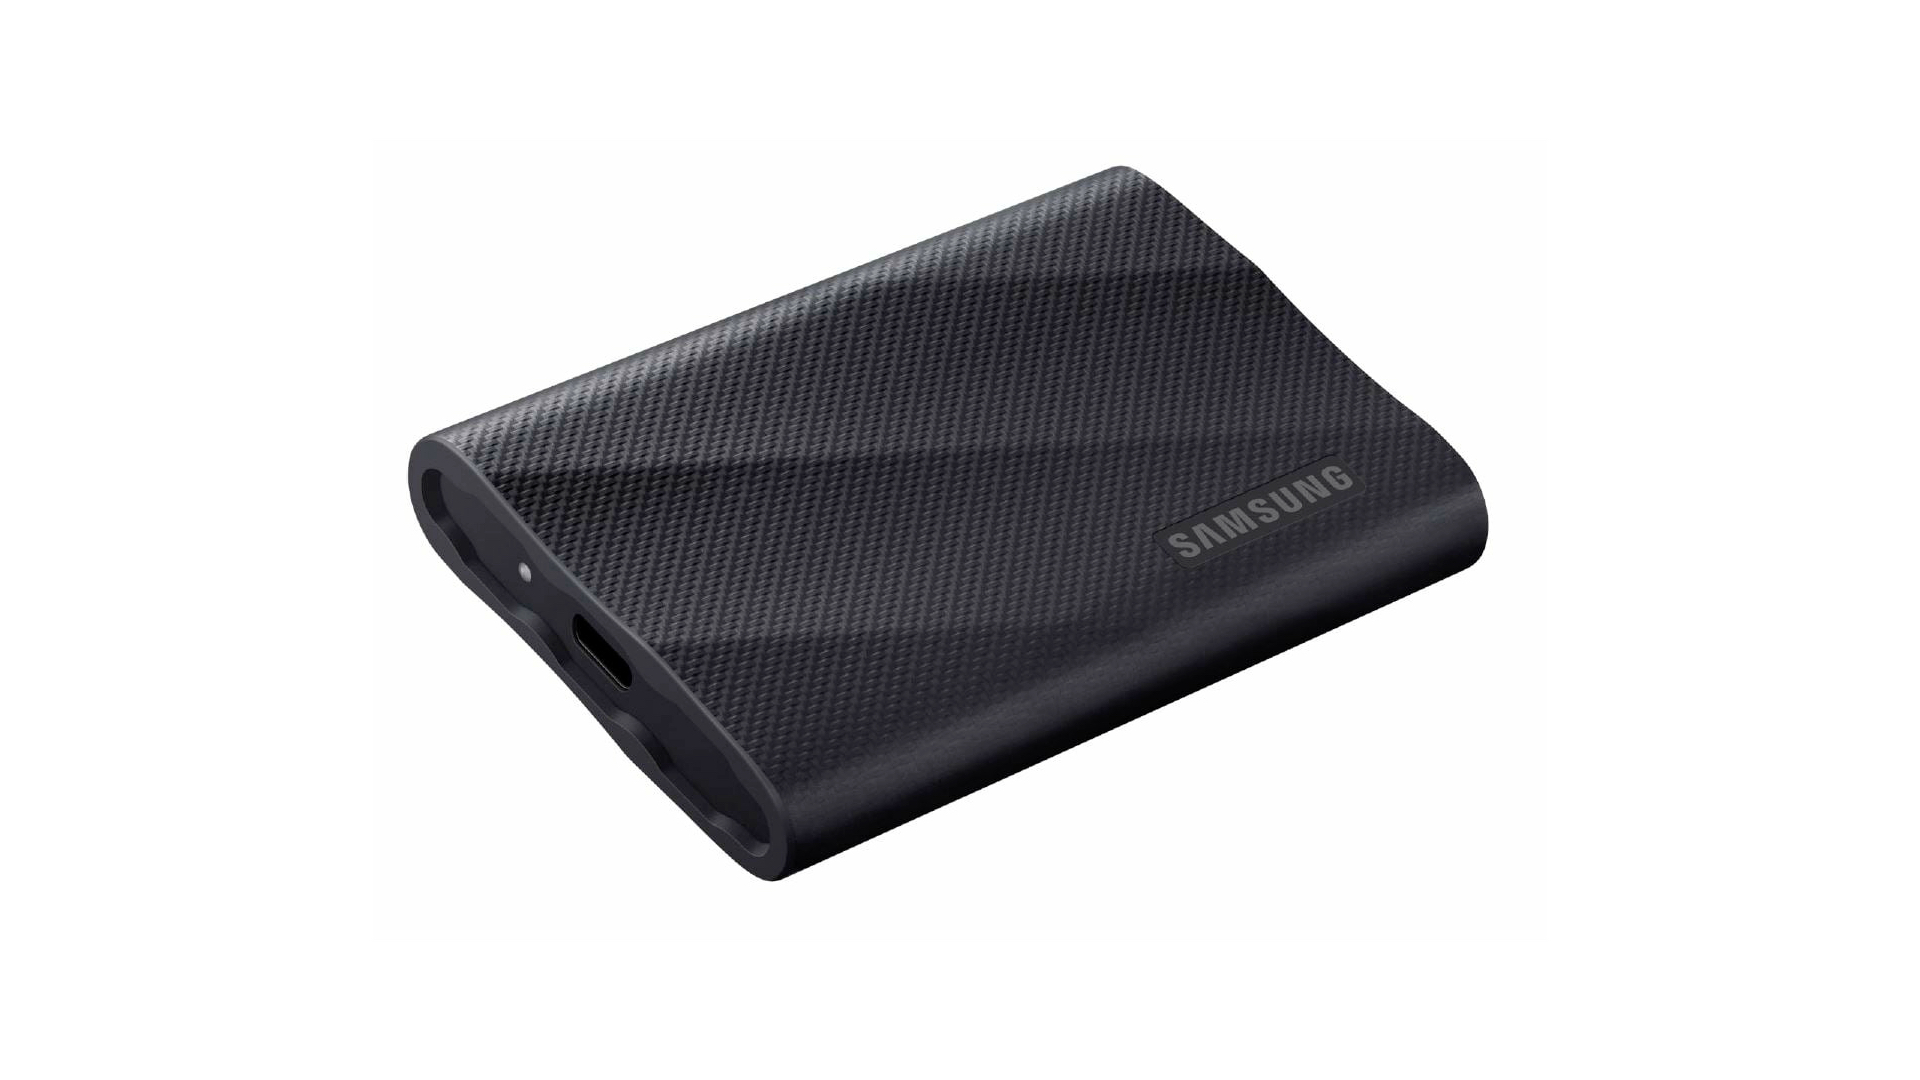 Samsung Portable SSD T9 leaks with Thunderbolt 4 connectivity